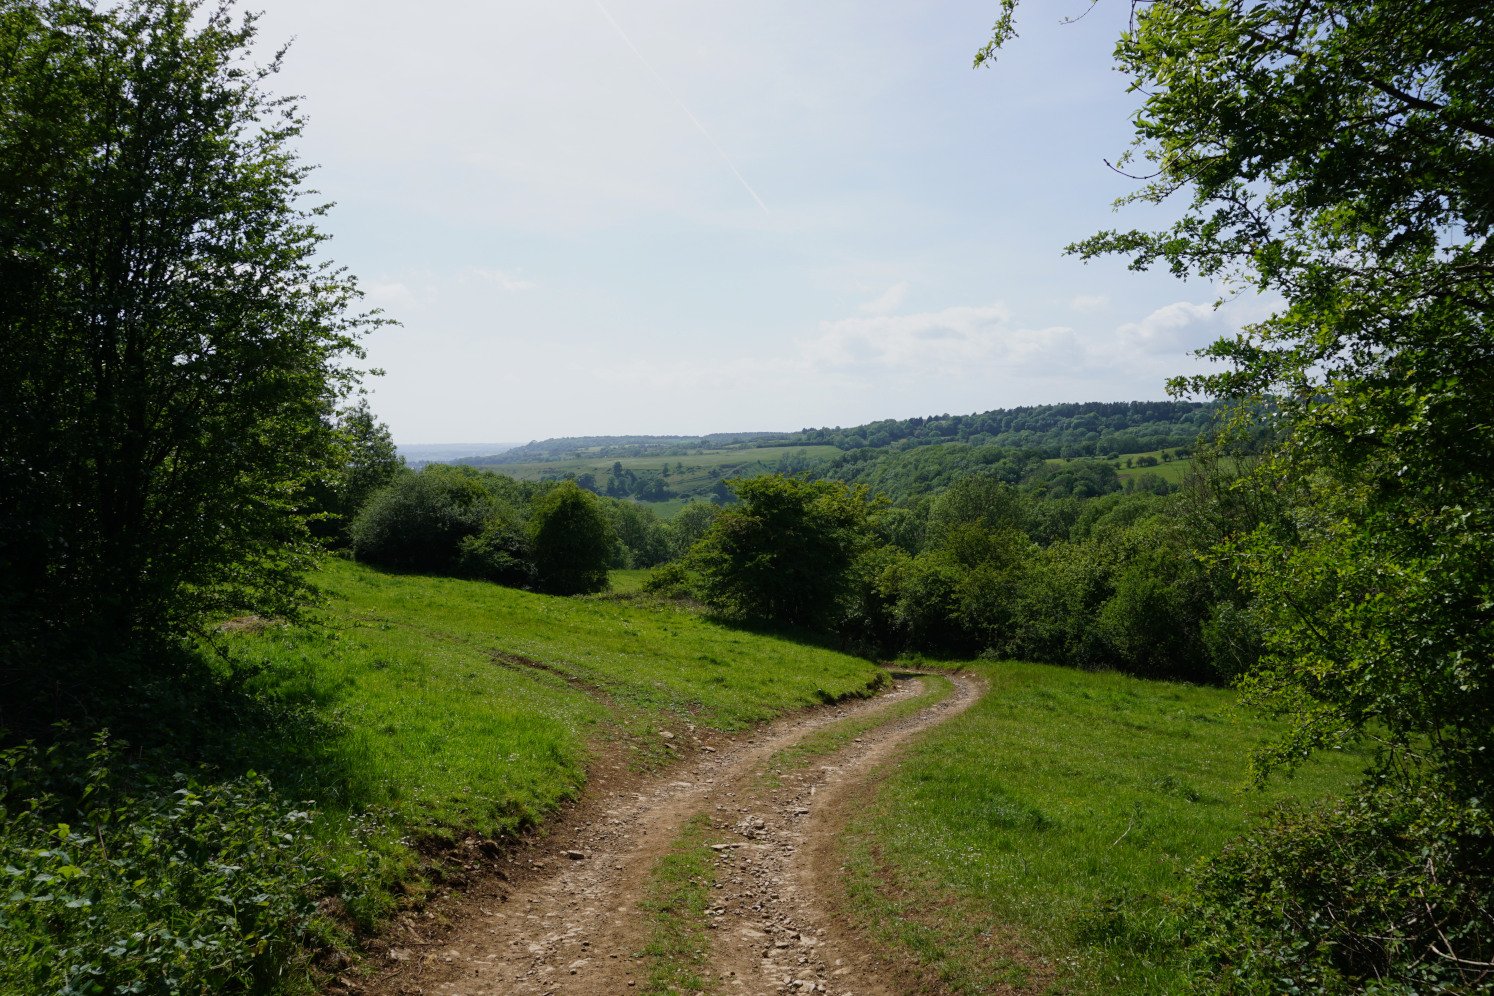 Views of the valley of Tyley Bottom in Wotton-under-Edge